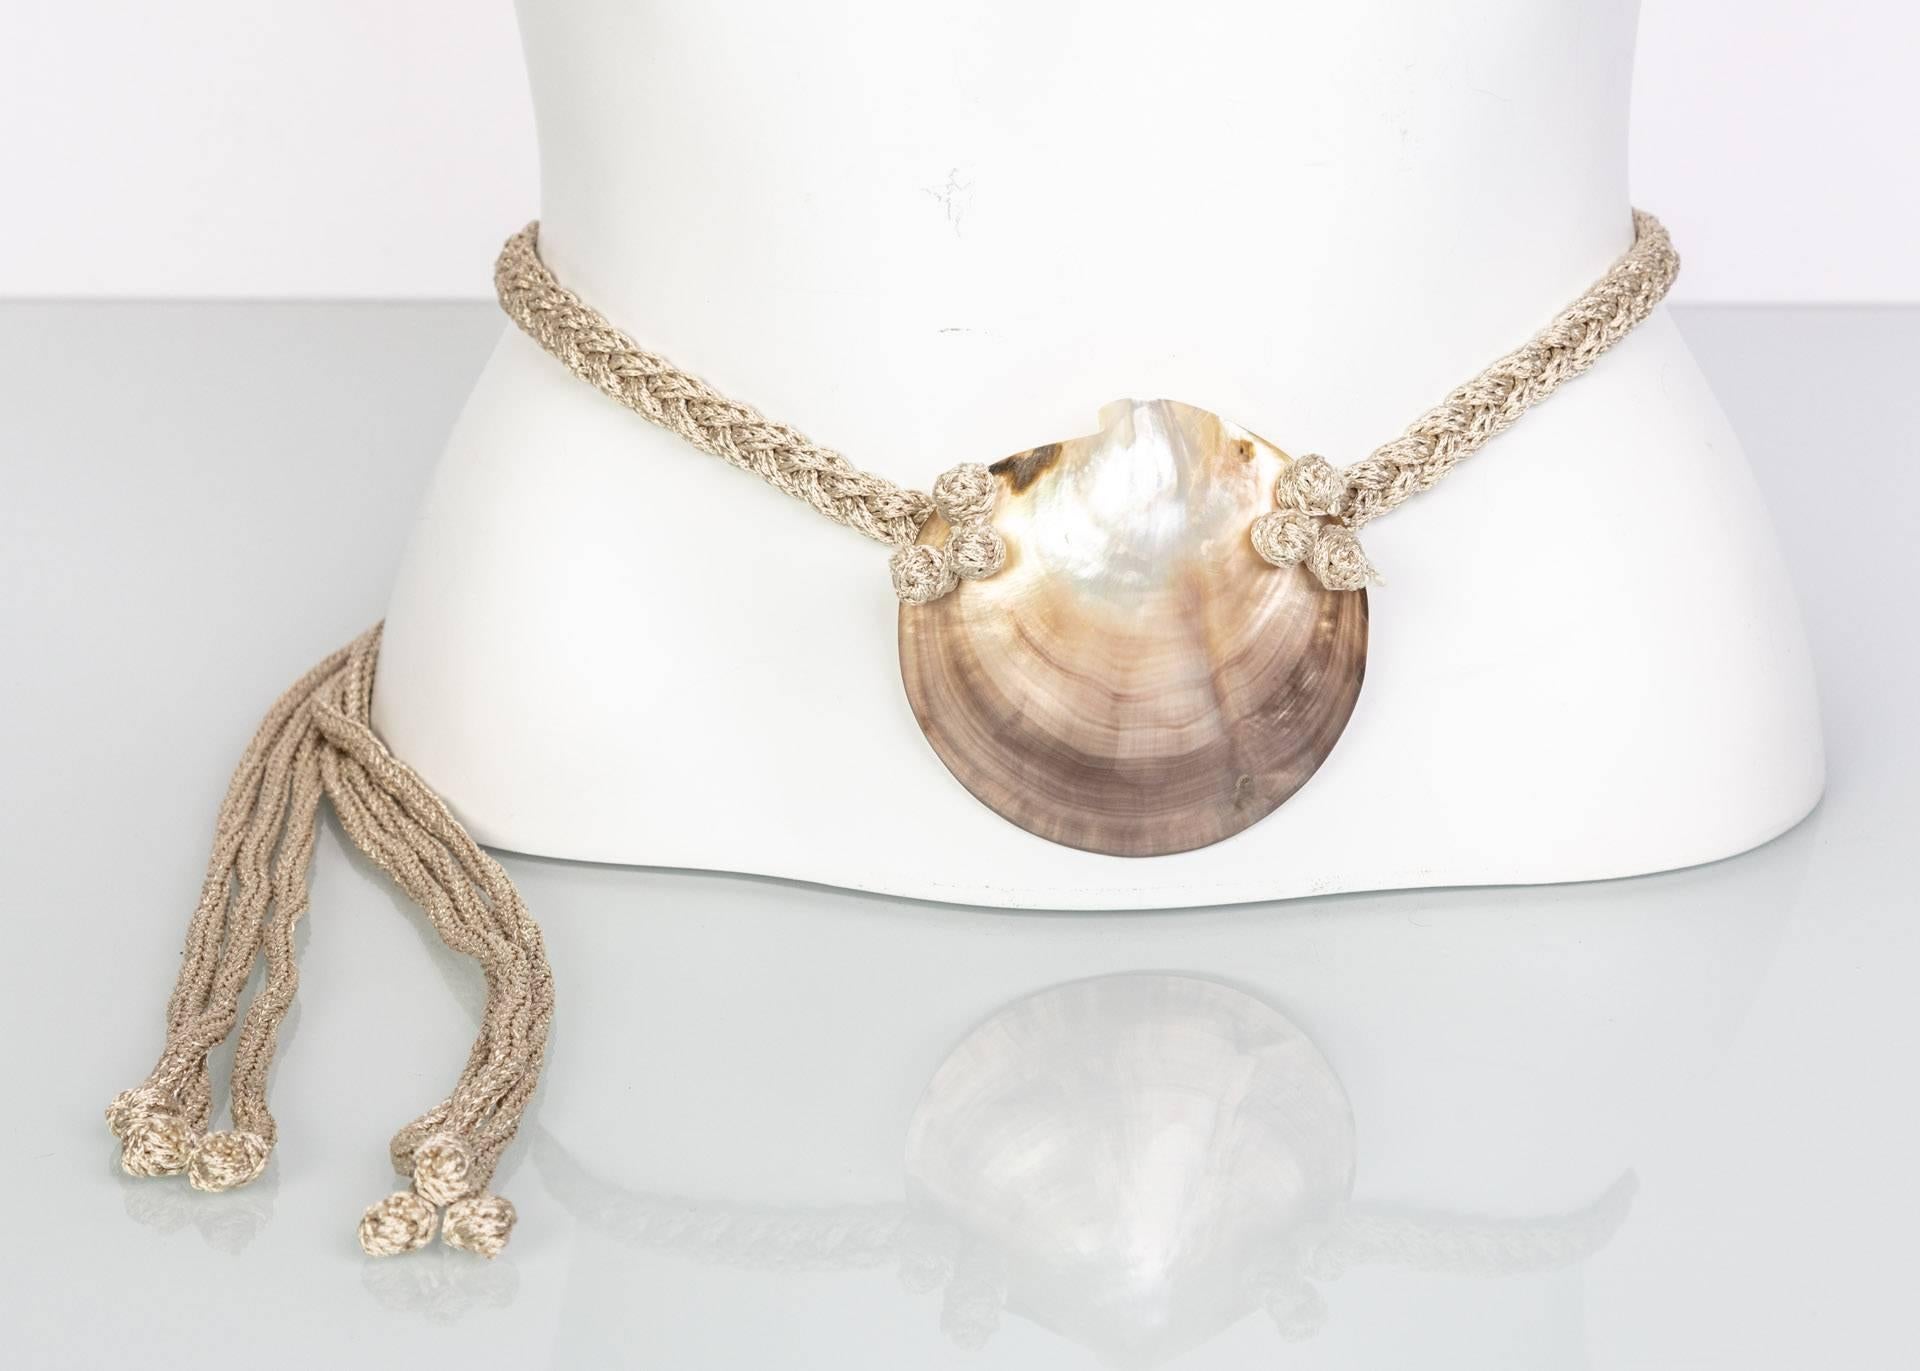 The shell has long since been an artistic symbol of beauty and femininity. Drawing this connotation from Botticelli’s 15th century painting The Birth of Venus, the shimmering shell serves as a source of wonder, acting as a common motif in sea